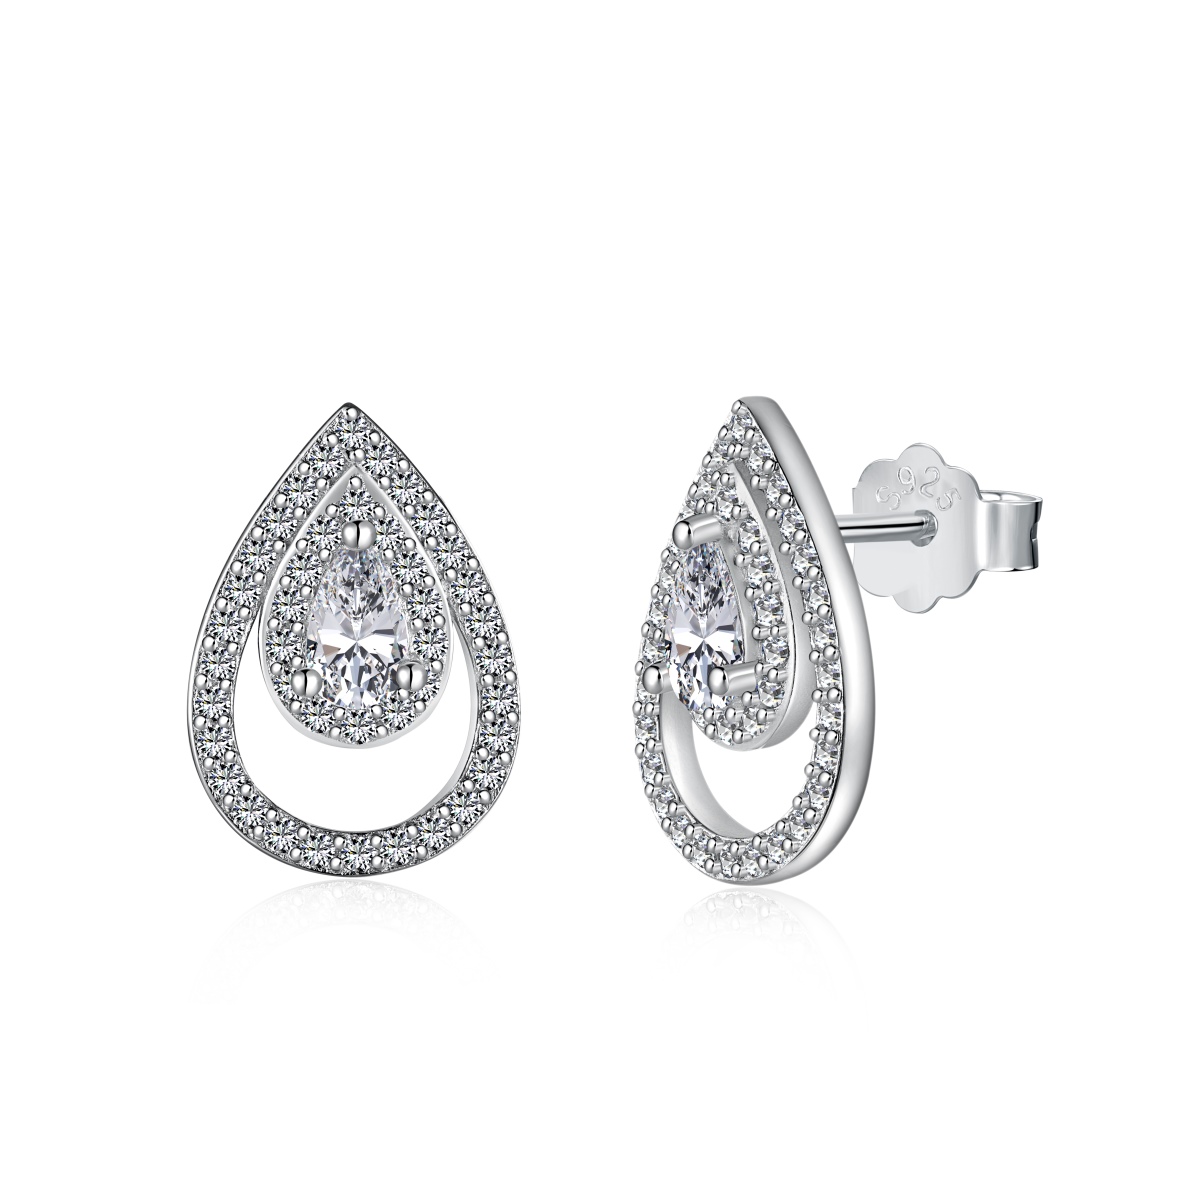 Exquisite Hollow Pear Sterling Silver Earrings